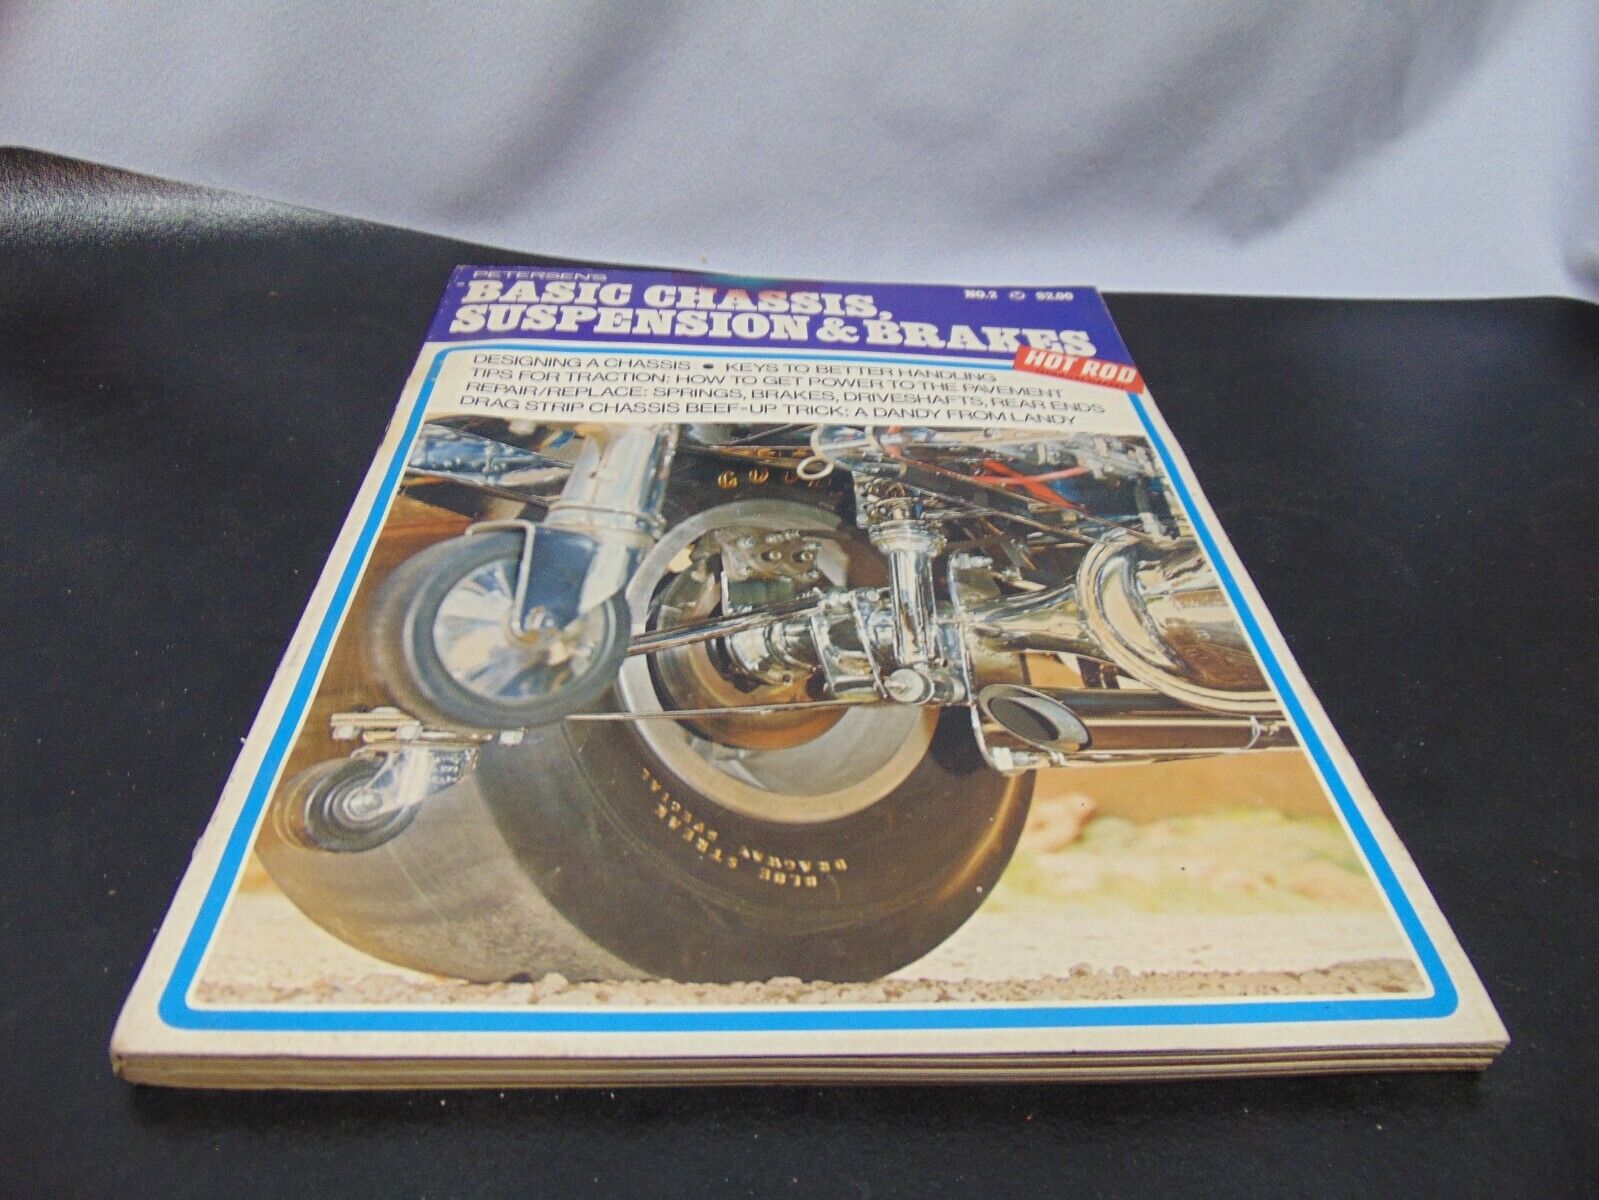 1971 Petersen's Basic Chassis, Suspension & Brakes for Hot Rod Book #2 192 pages